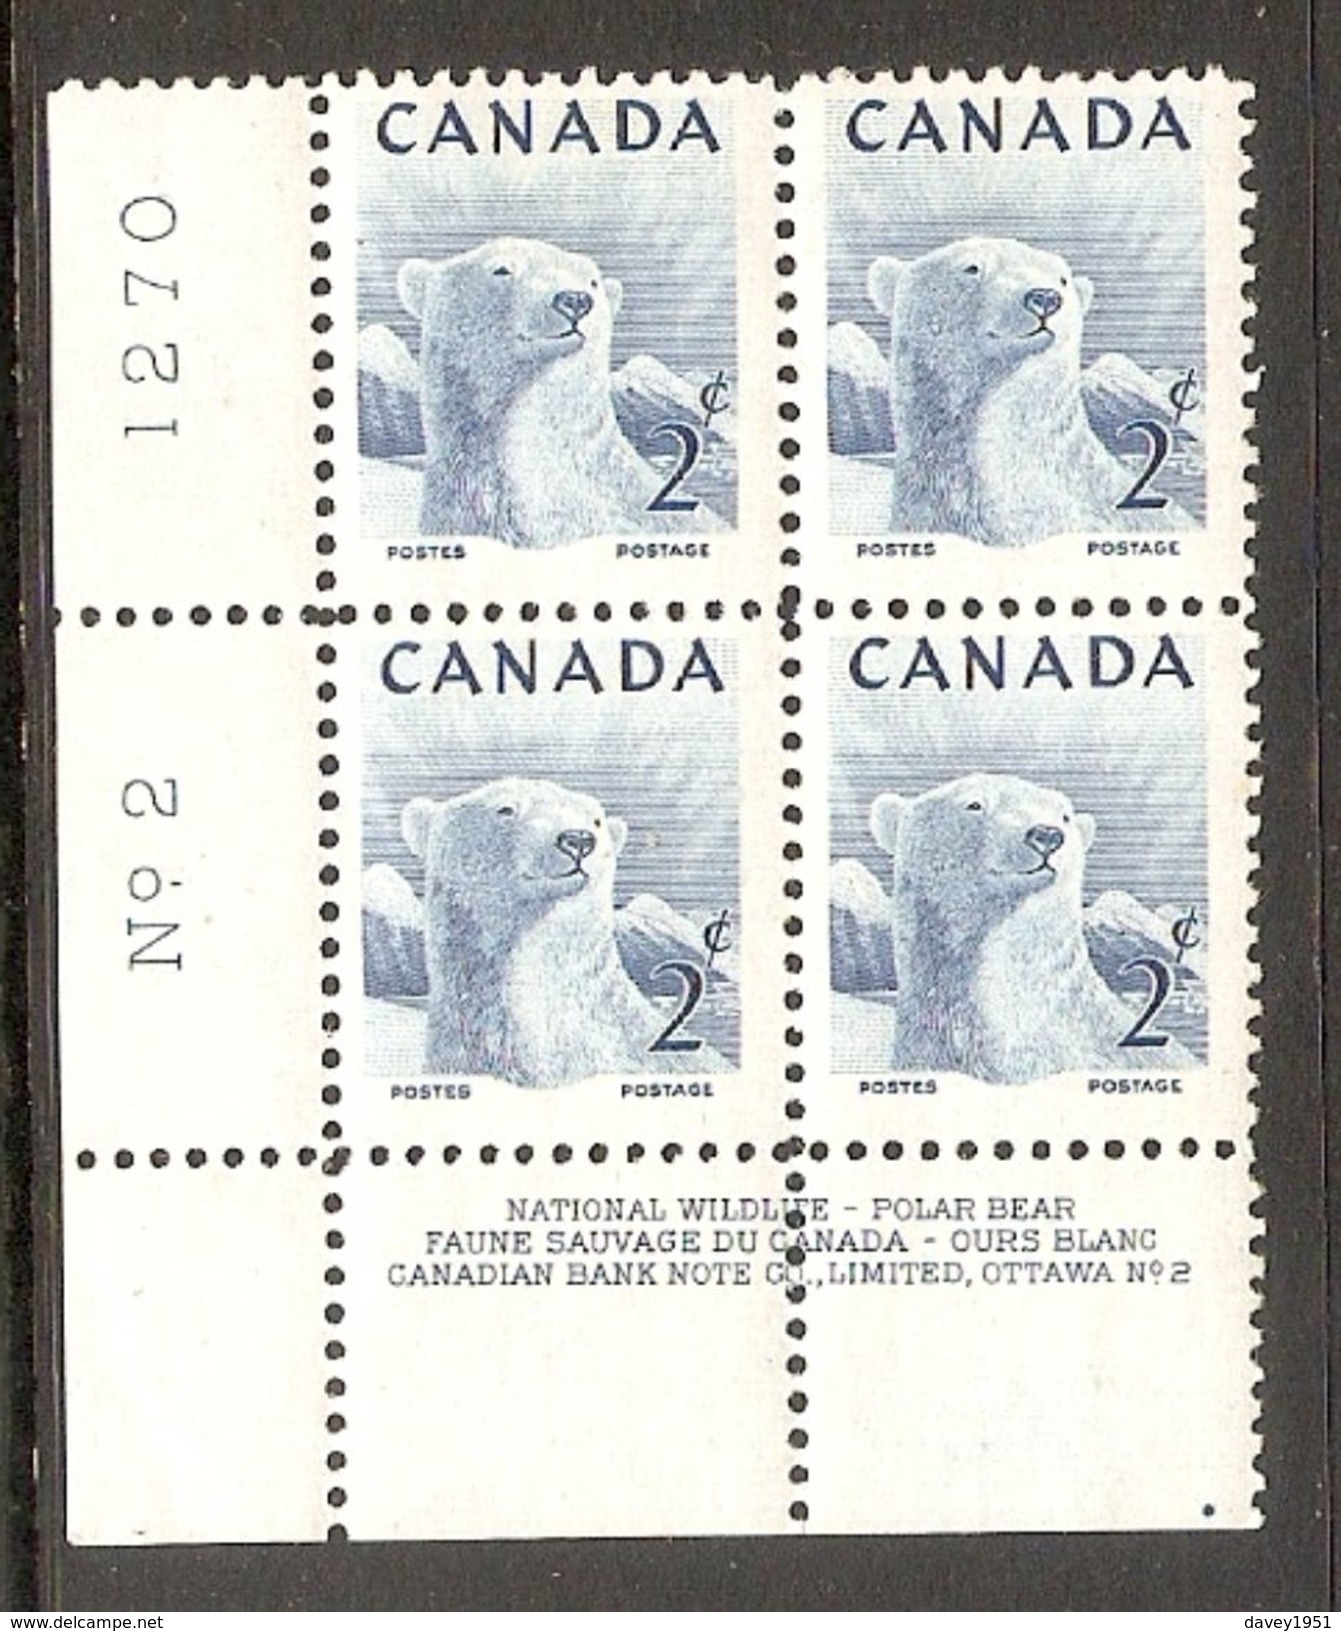 005957 Canada KGVI 1953 Wildlife 2c MNH Plate Block 2 LL - Plate Number & Inscriptions